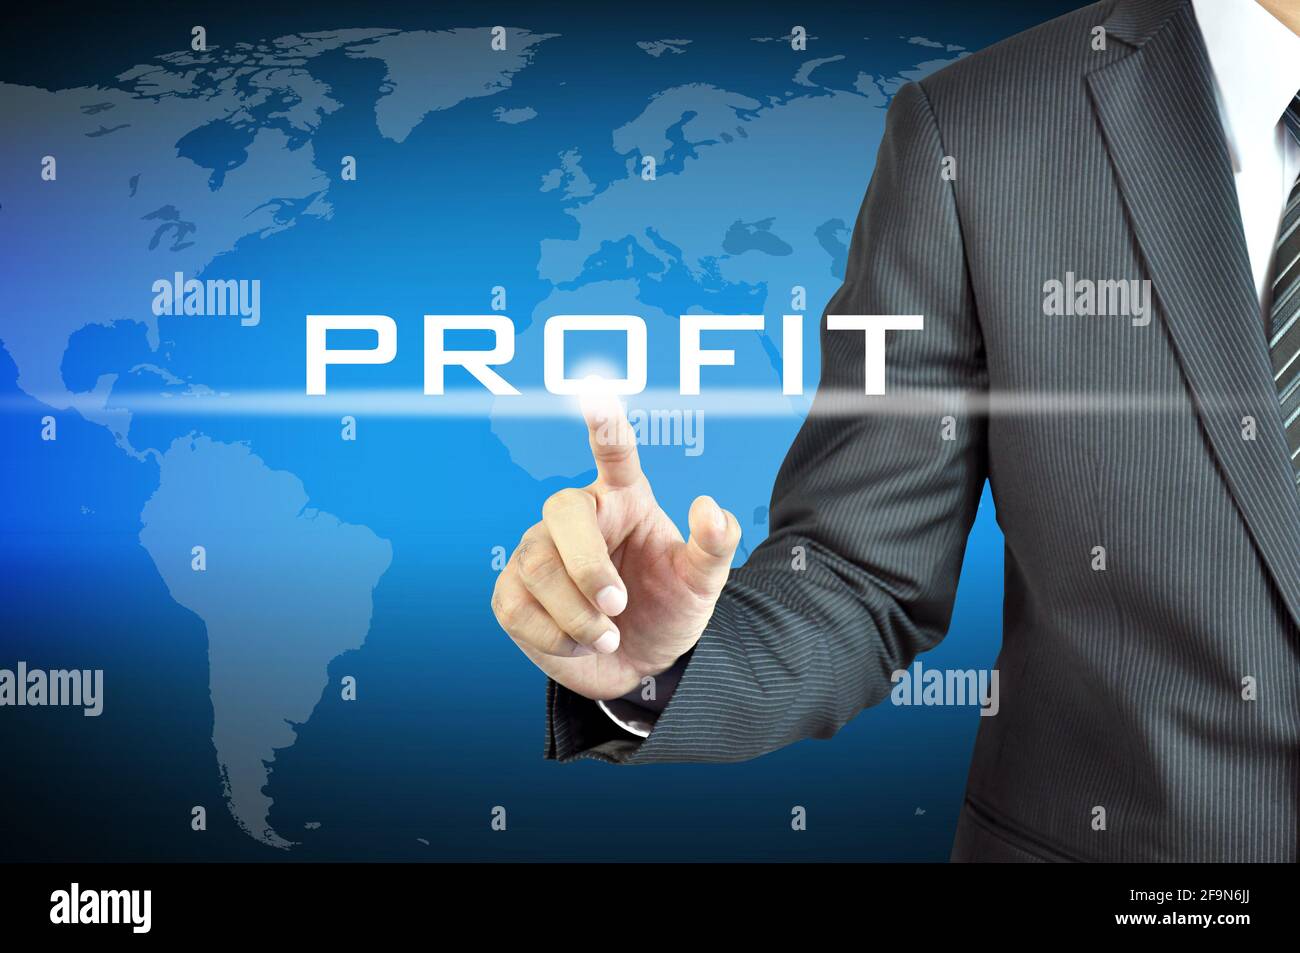 Businessman hand touching PROFIT word on virtual screen - commercial & investment concept Stock Photo